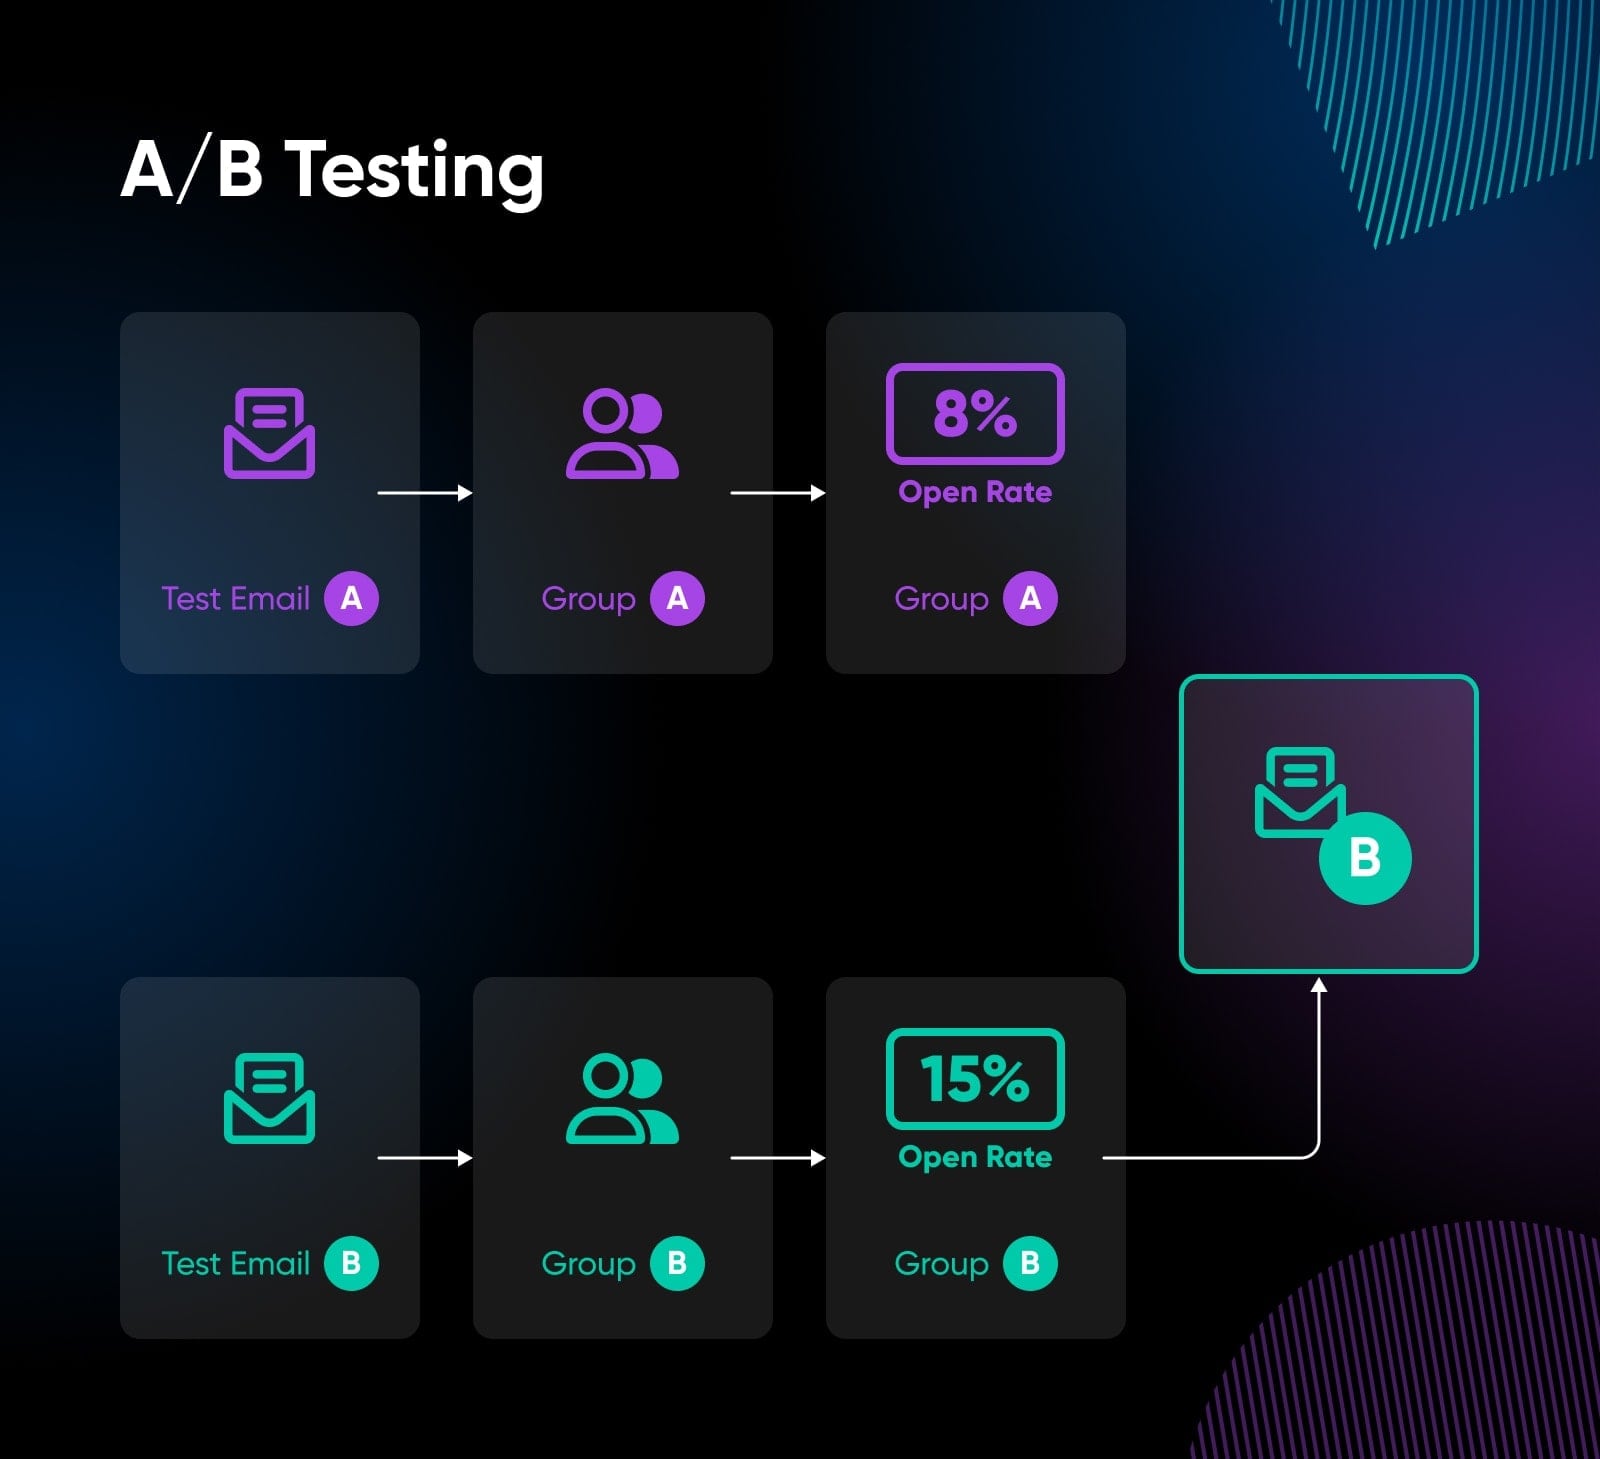 A/B testing as a visual where email A goes to group A with a 8% open rate compared to email B to group B with a 15% open rate